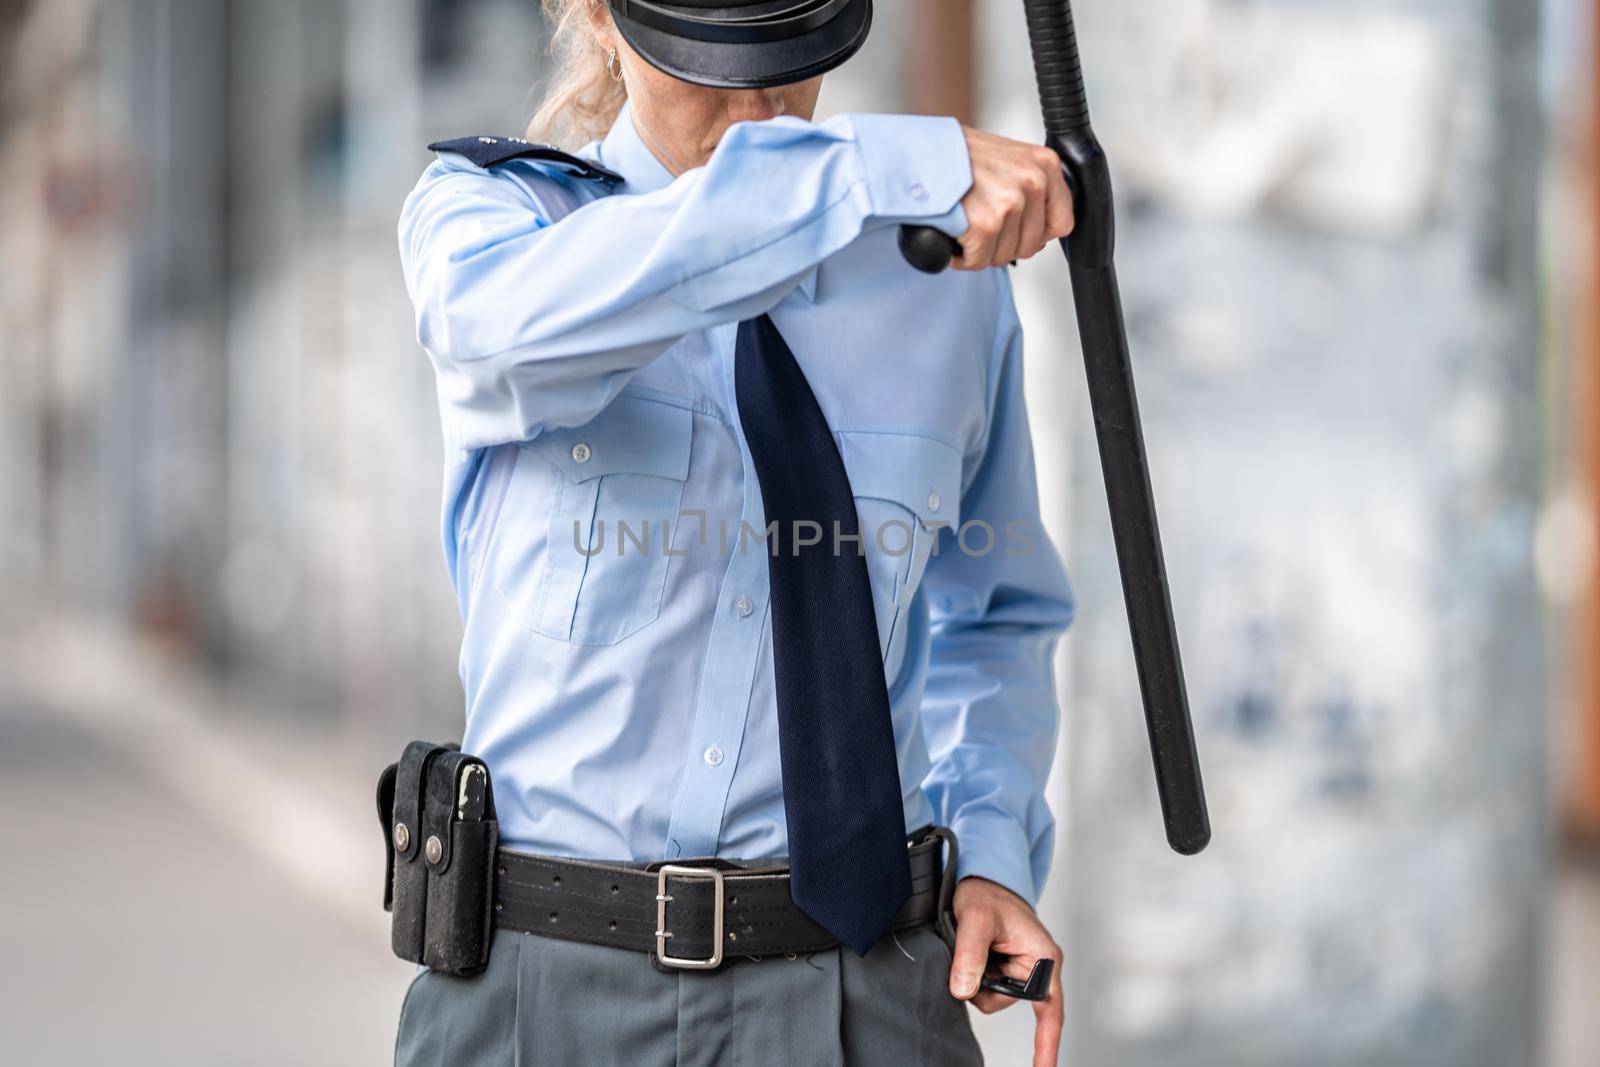 policewoman with a baton in her hand in the street by Edophoto